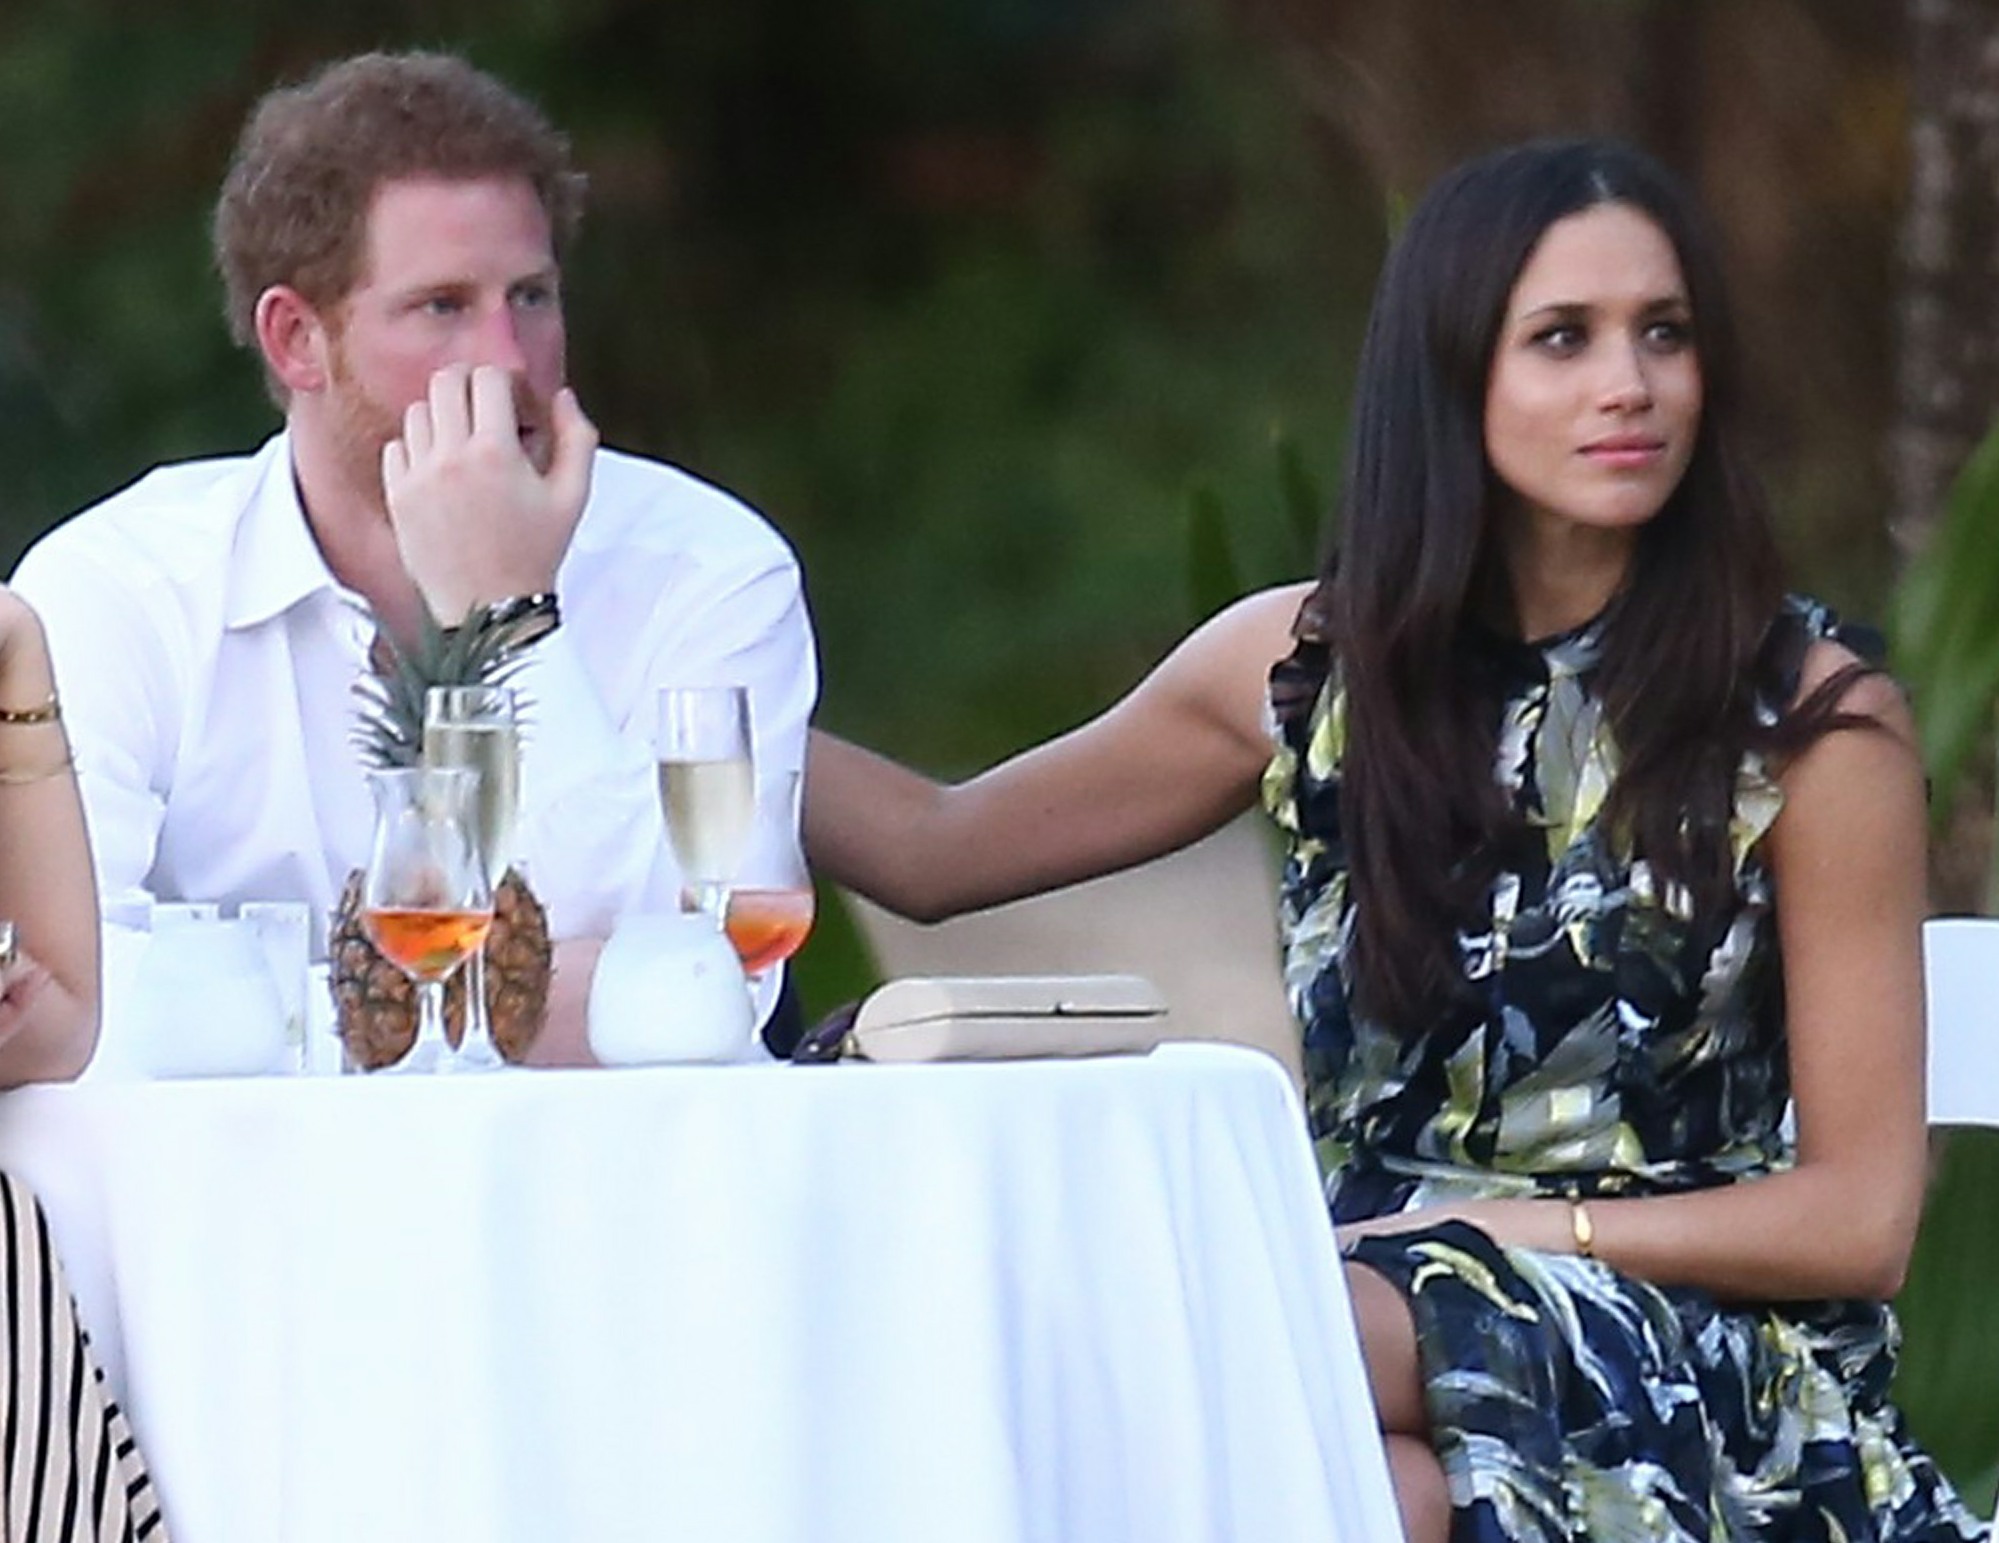 Prince Harry and his girlfriend Meghan Markle